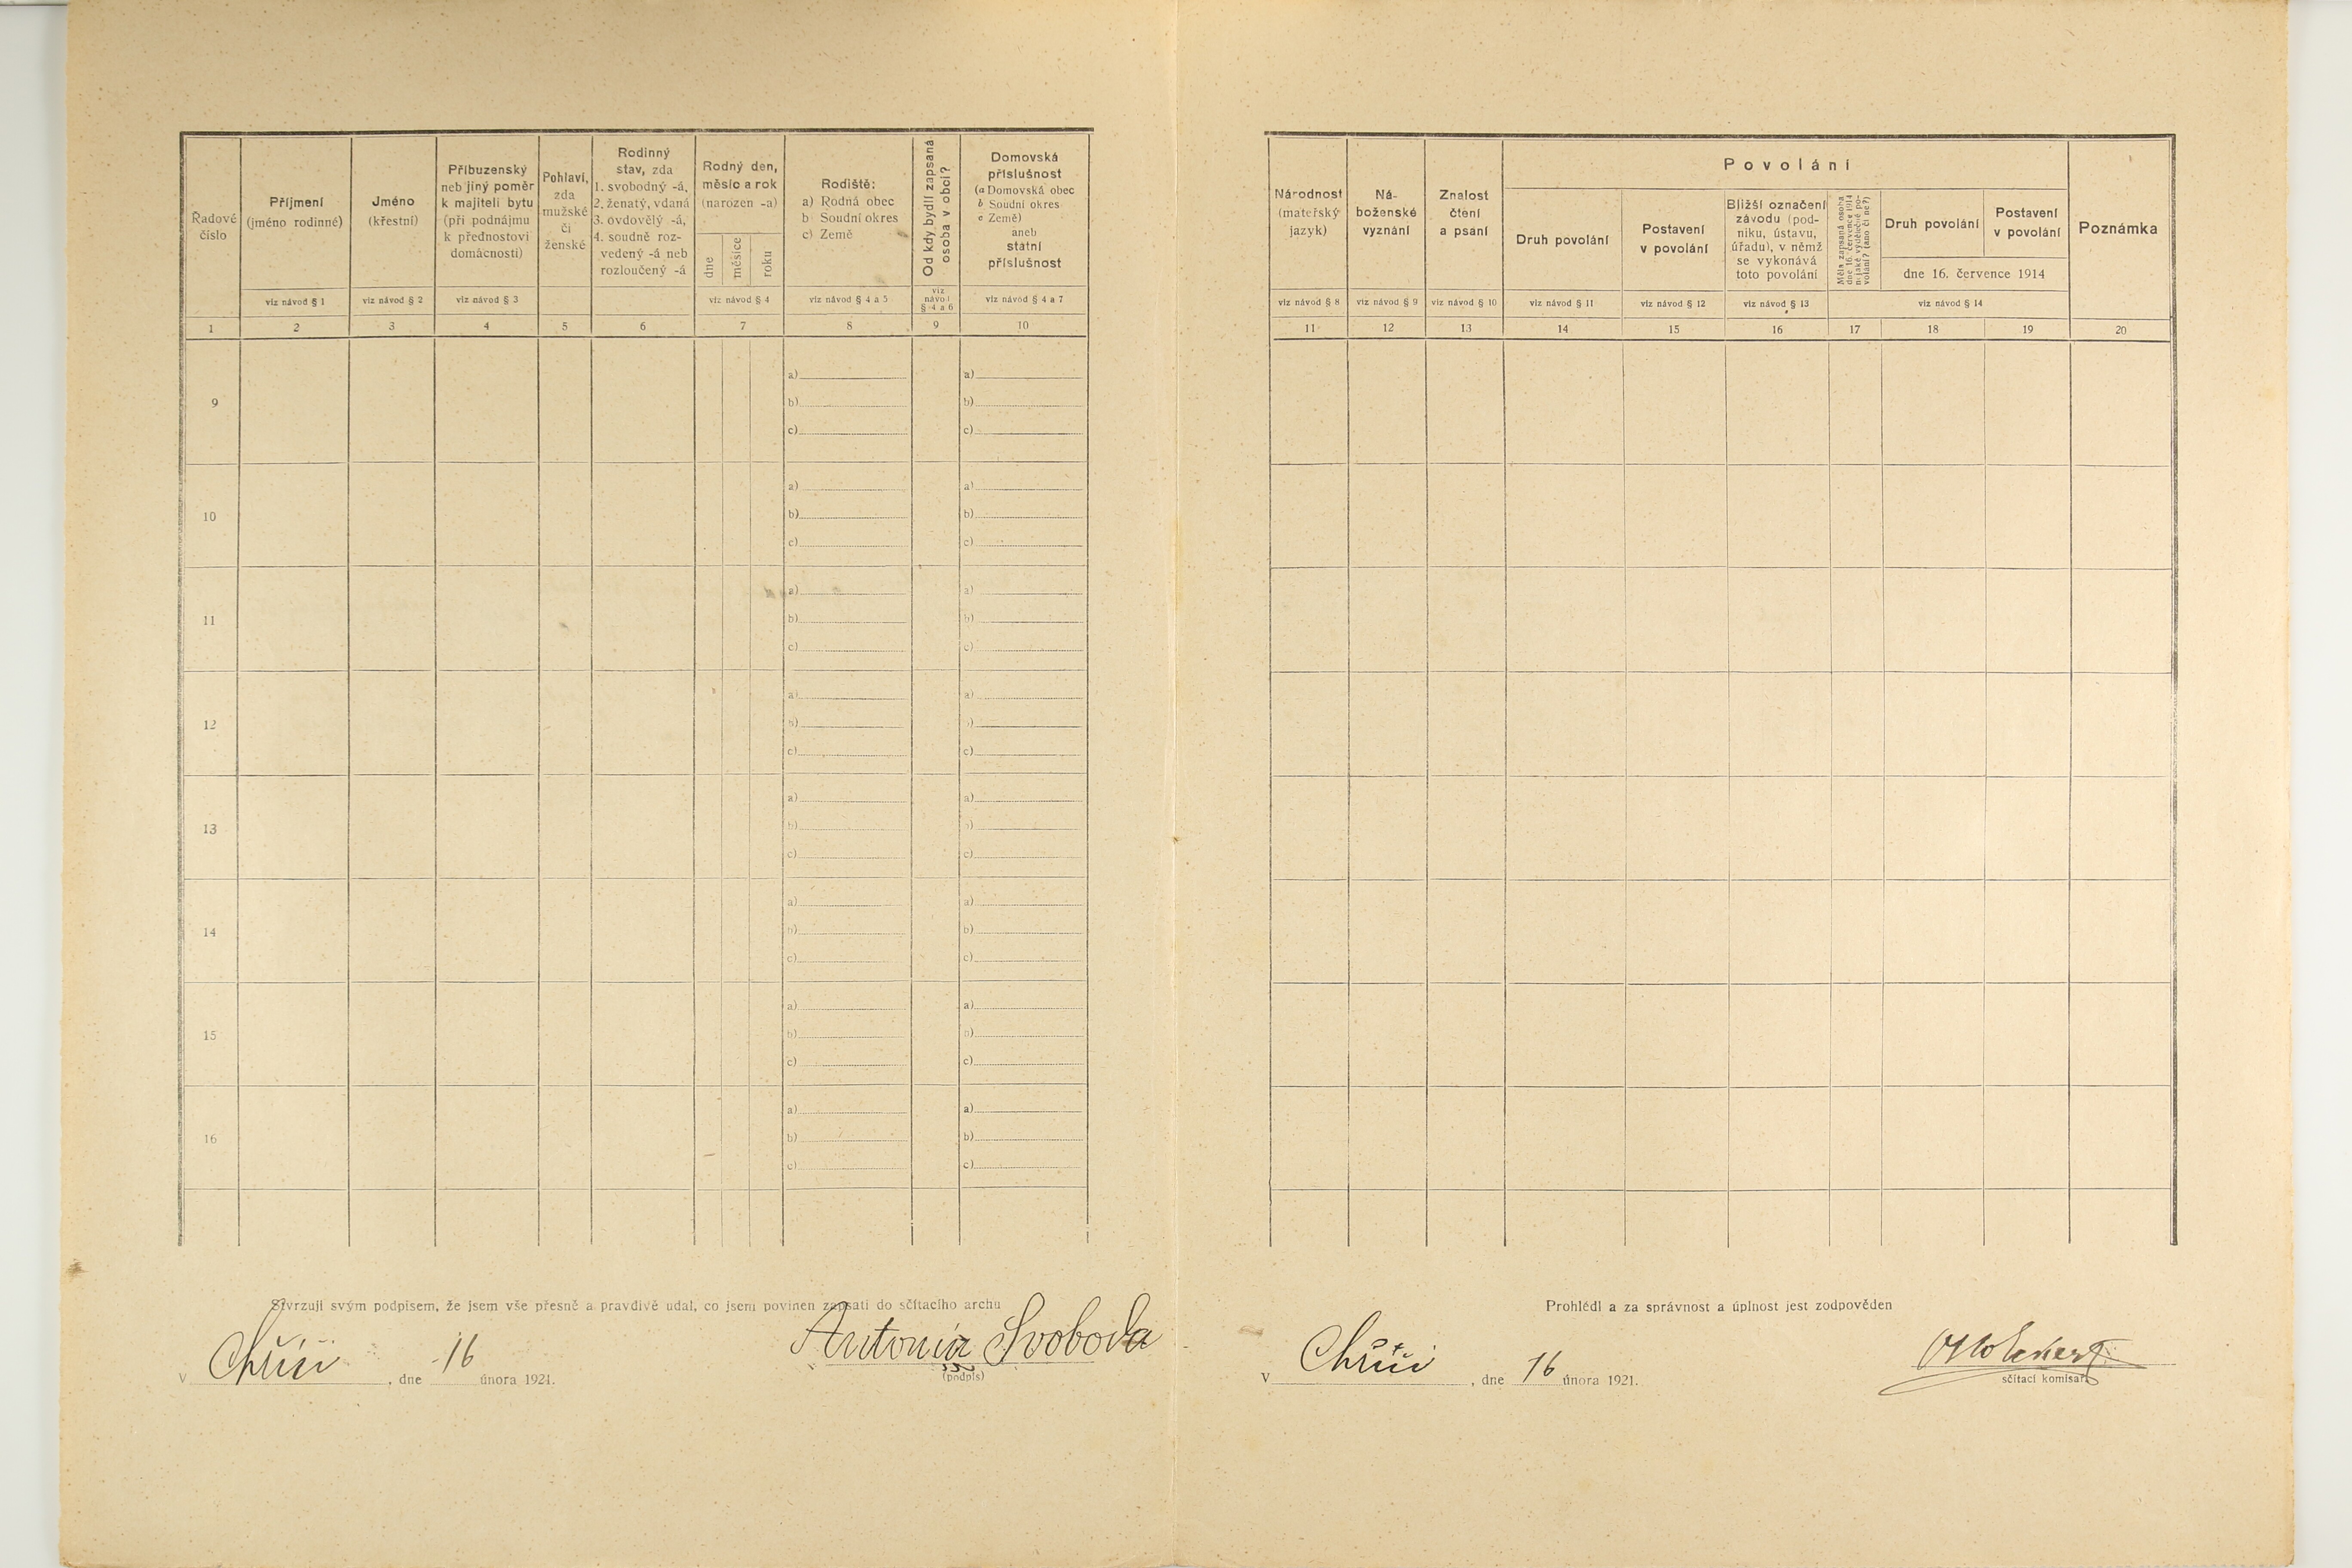 25. soap-ps_00423_census-1921-chric-cp001_0250